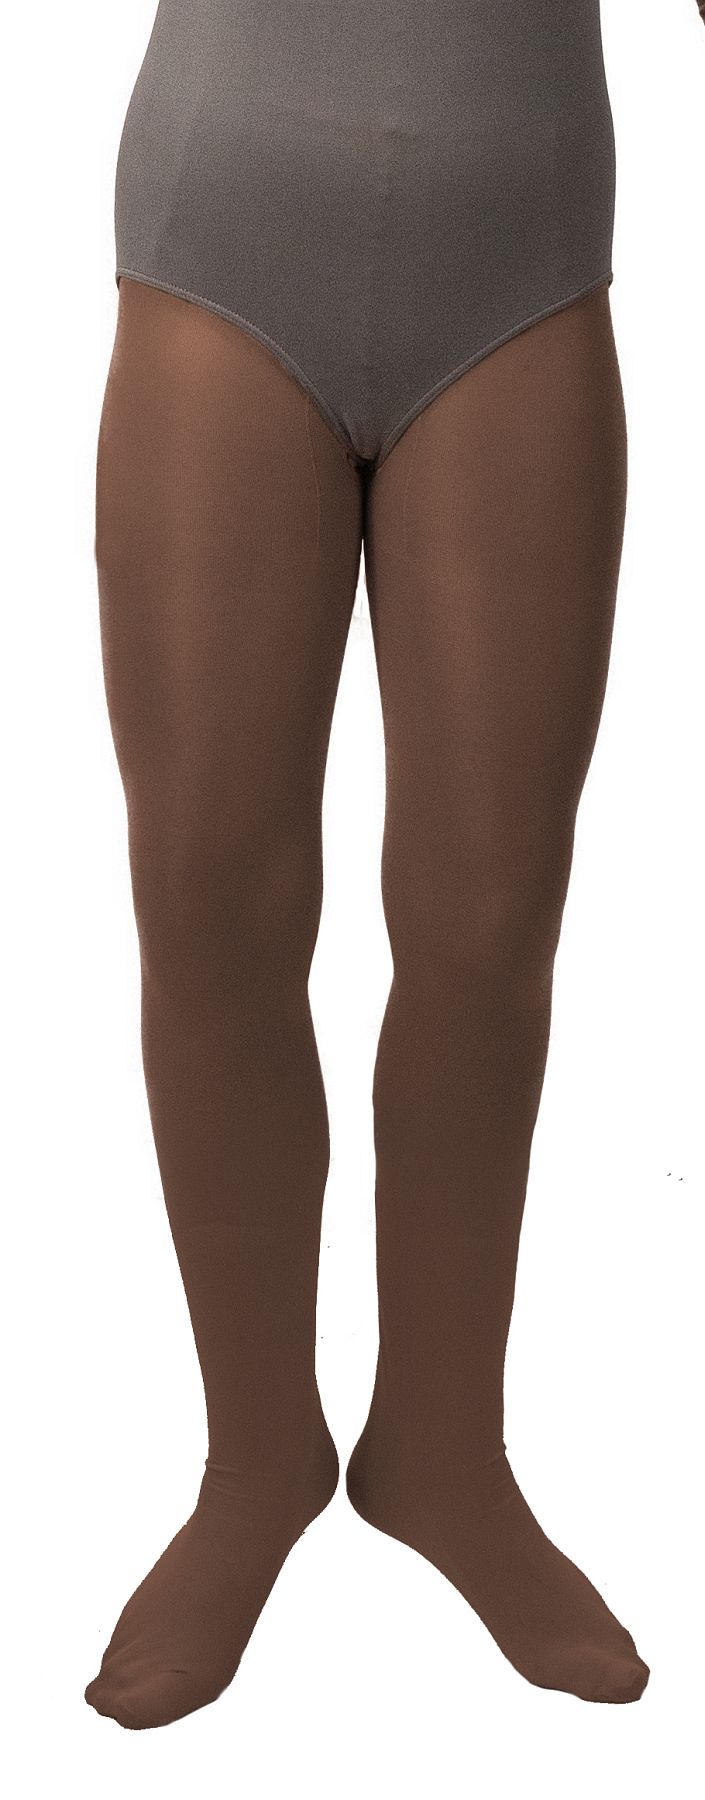 Opaque tights, brown